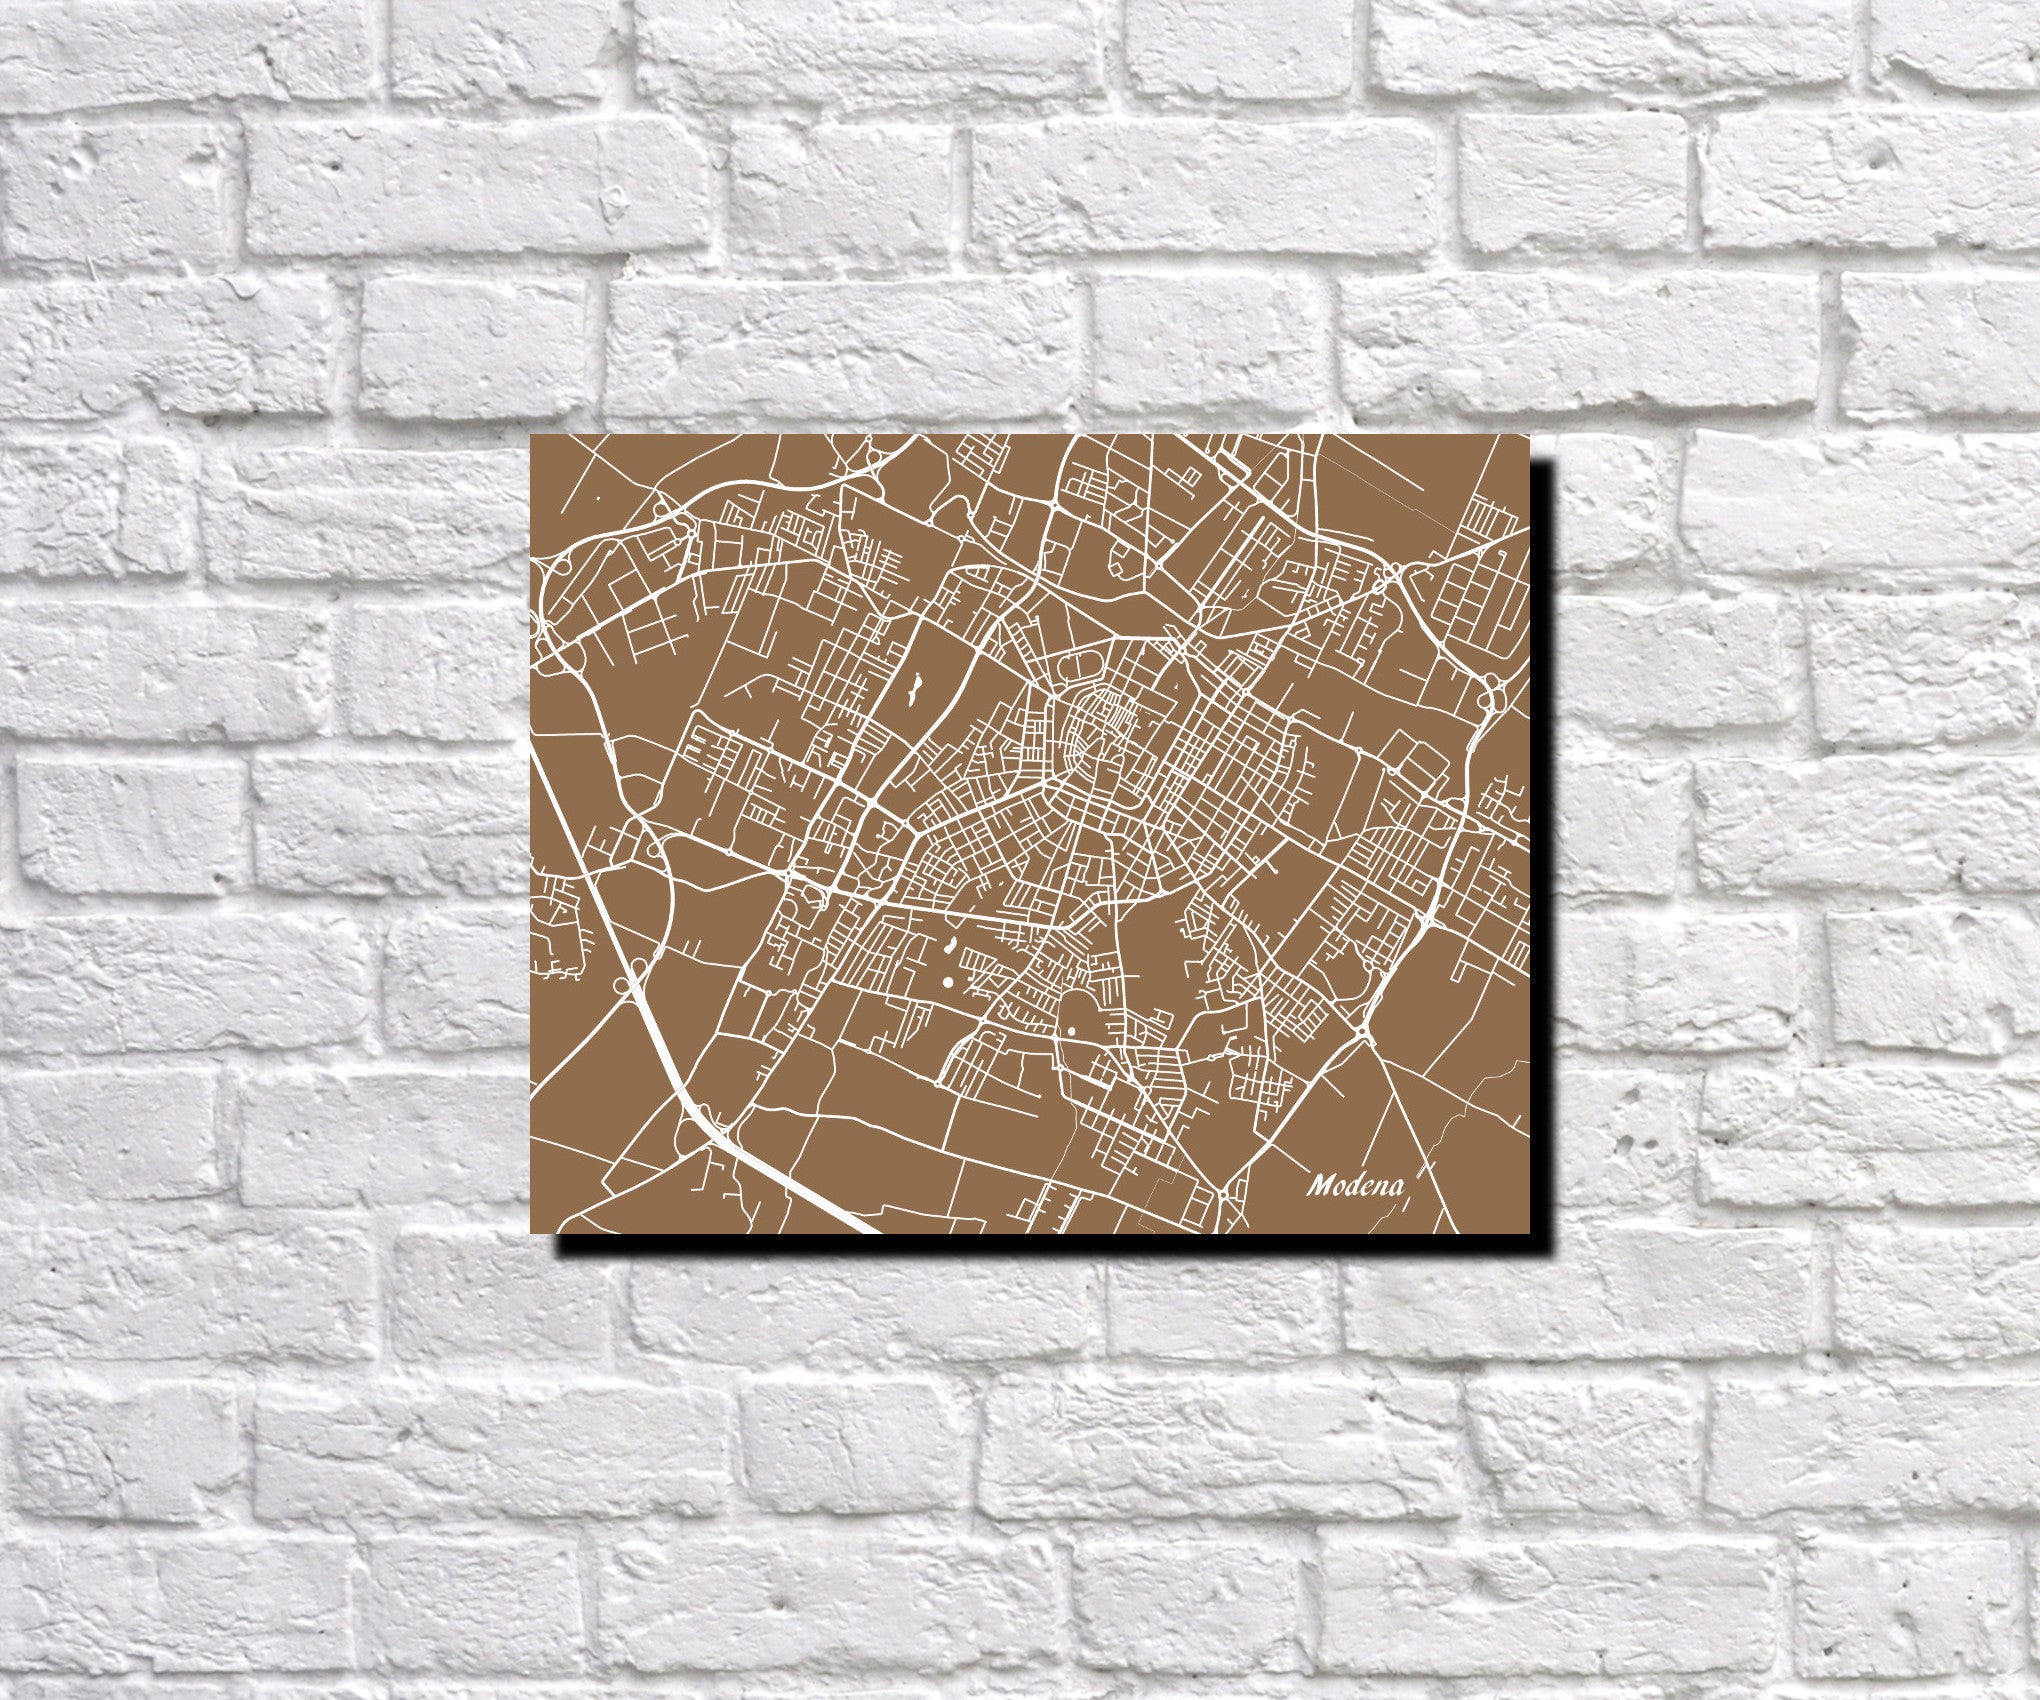 Modena, Italy City Street Map Print Feature Wall Art Poster